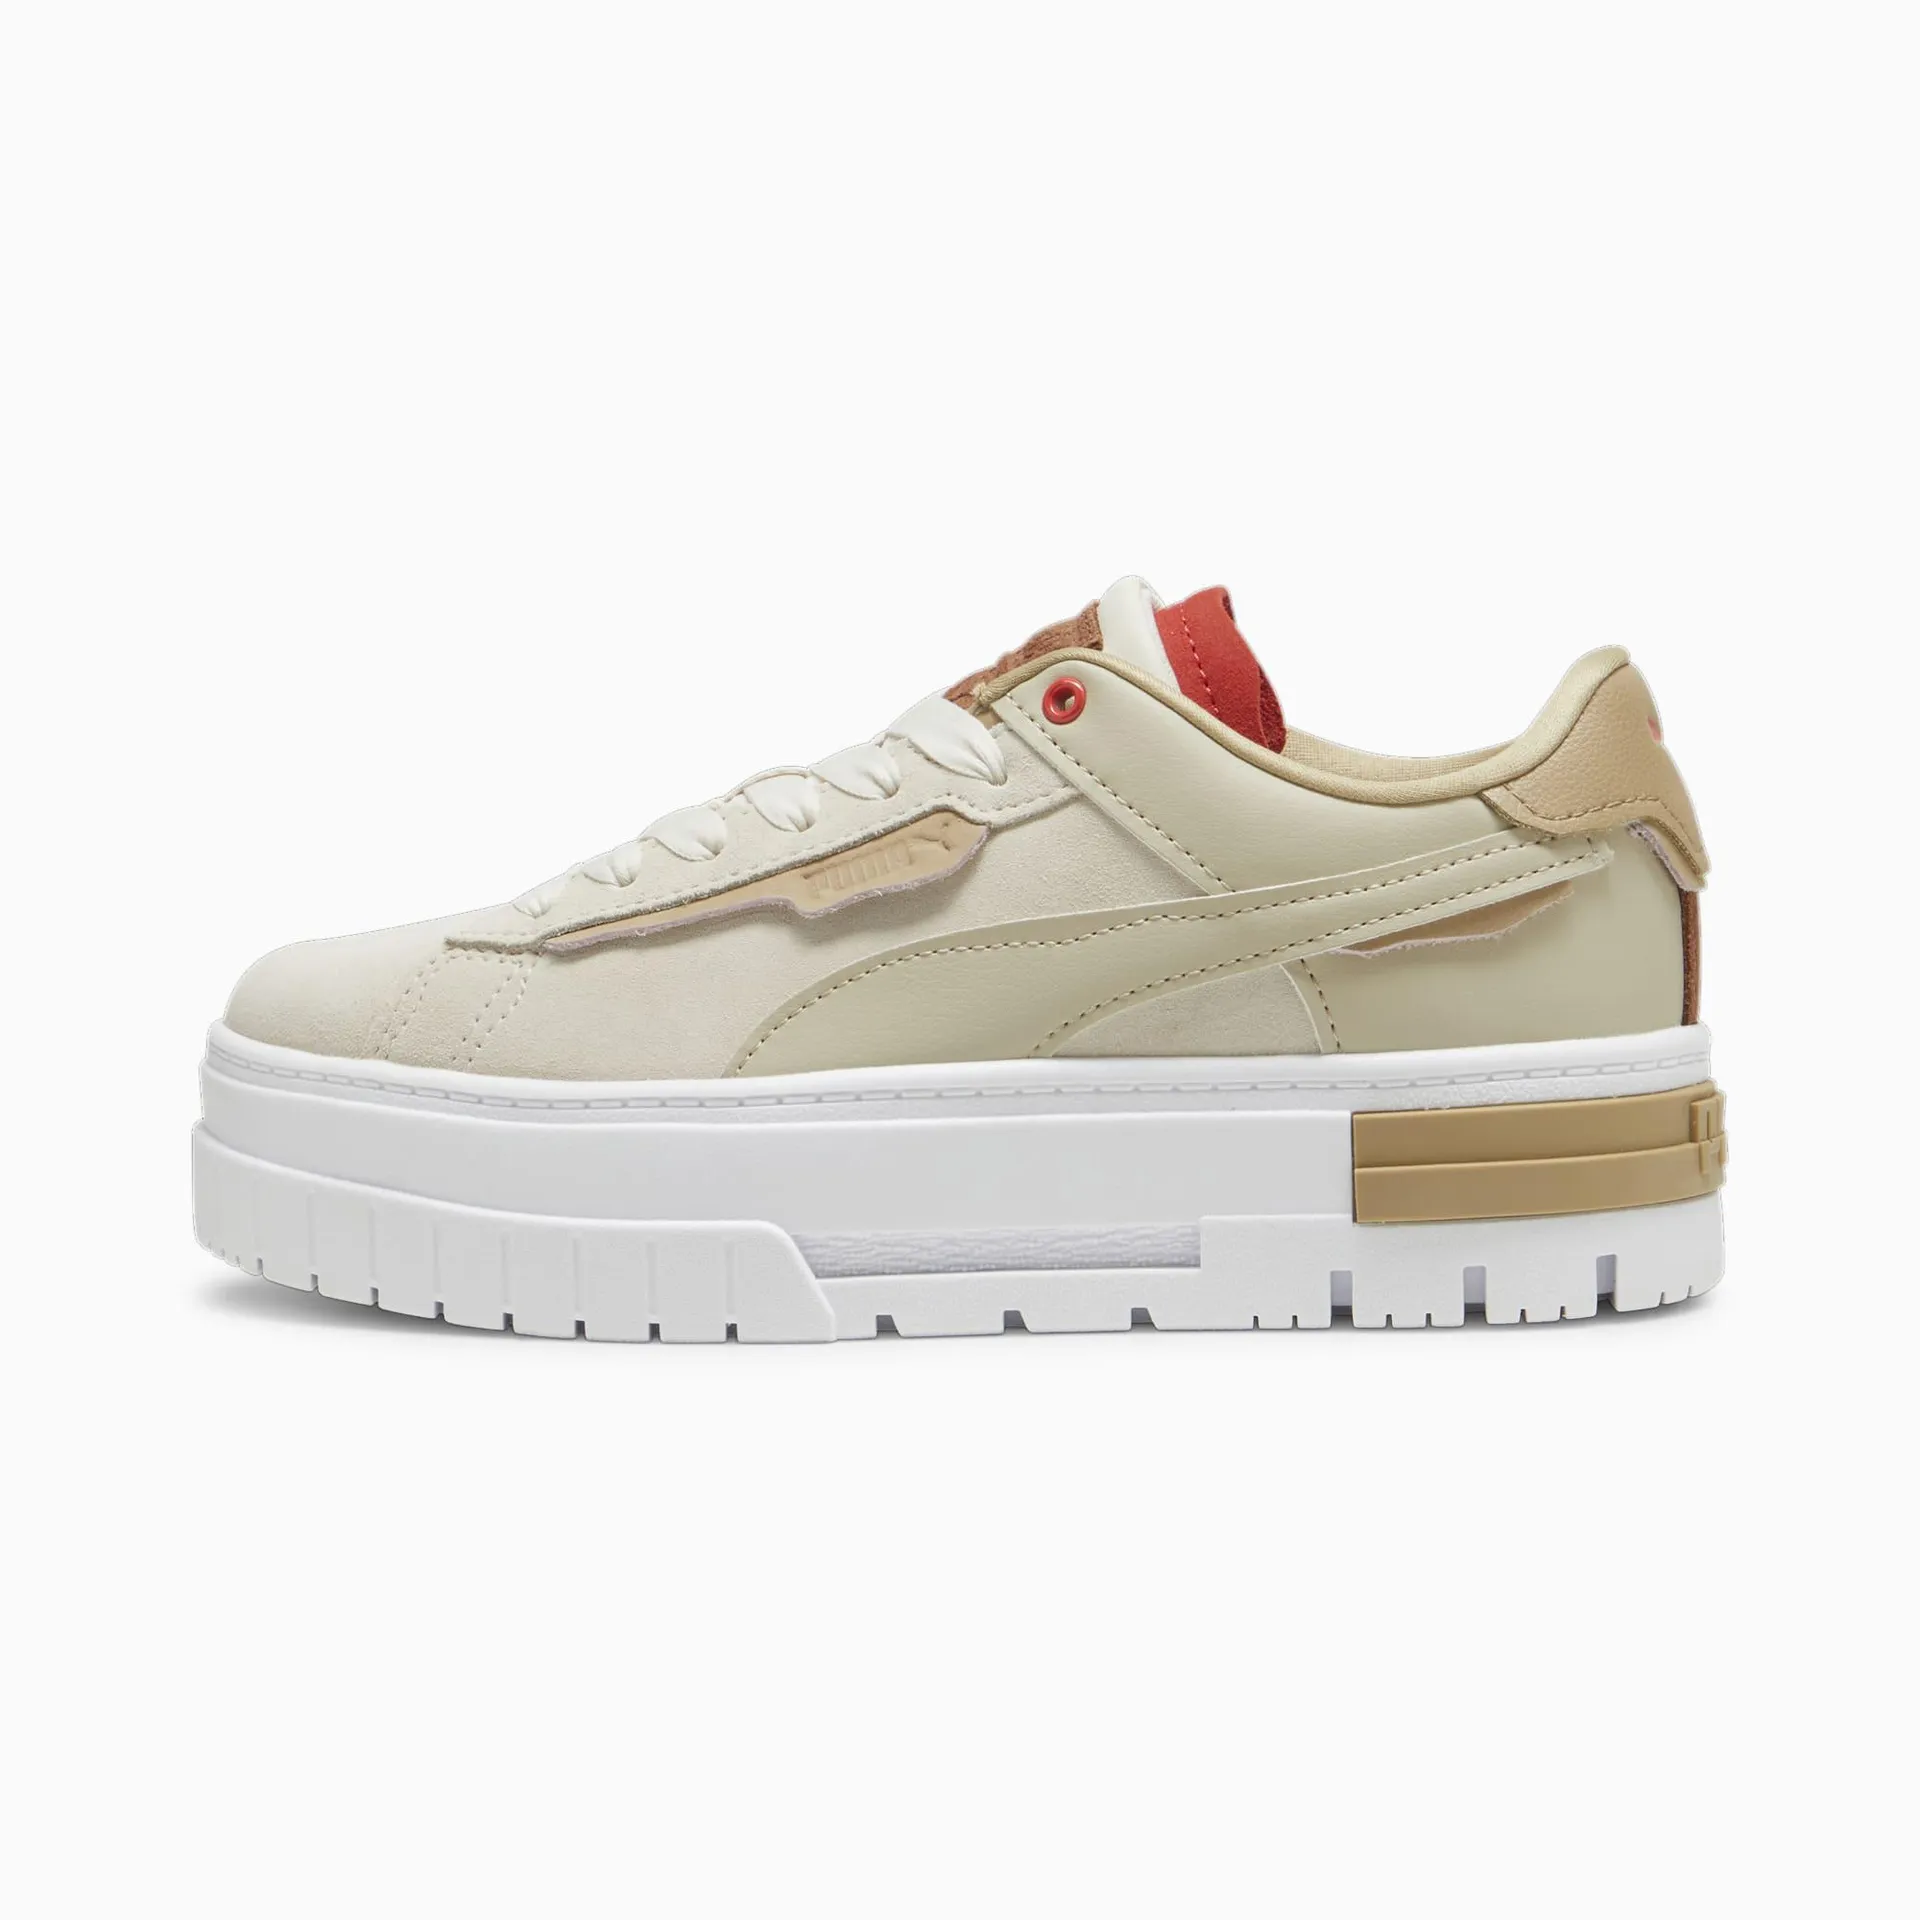 Mayze Crashed No Filter Women's Sneakers